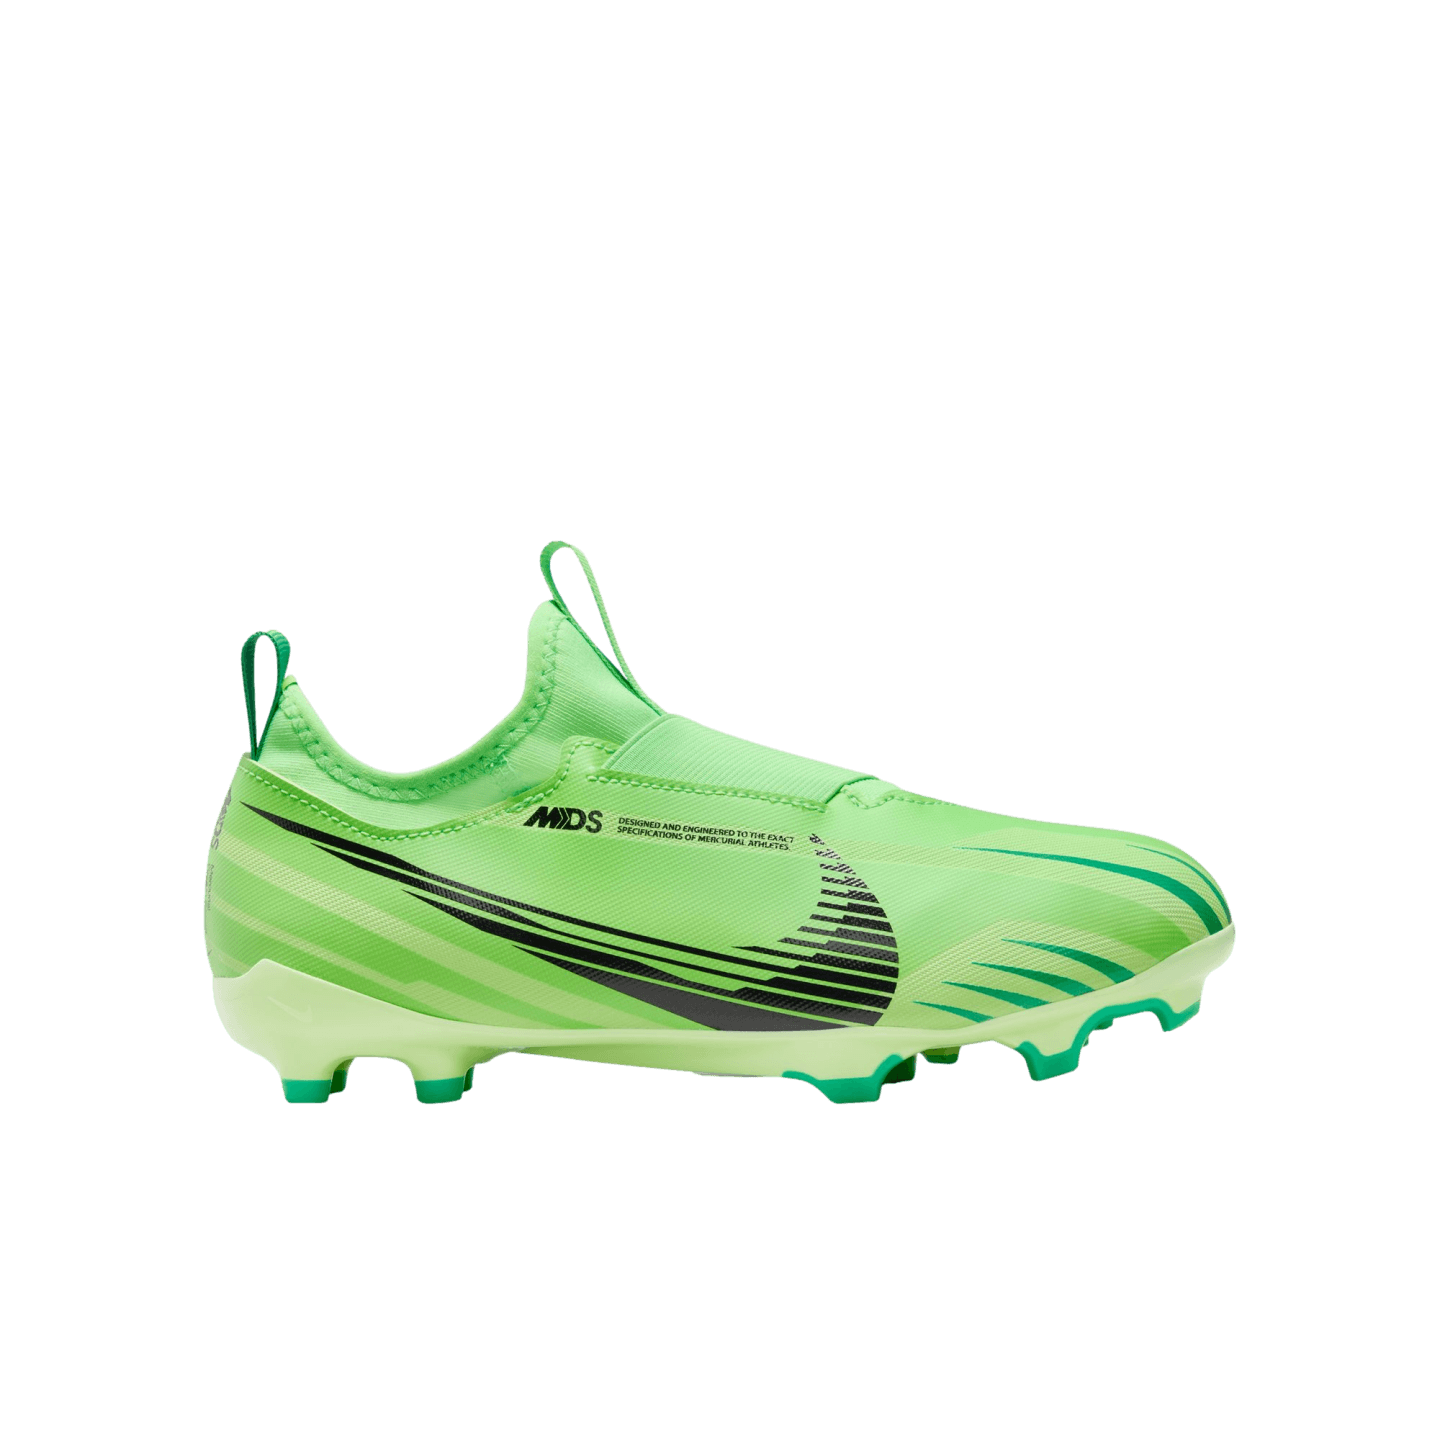 Nike Mercurial Vapor 15 Academy MDS Youth Firm Gorund Cleats